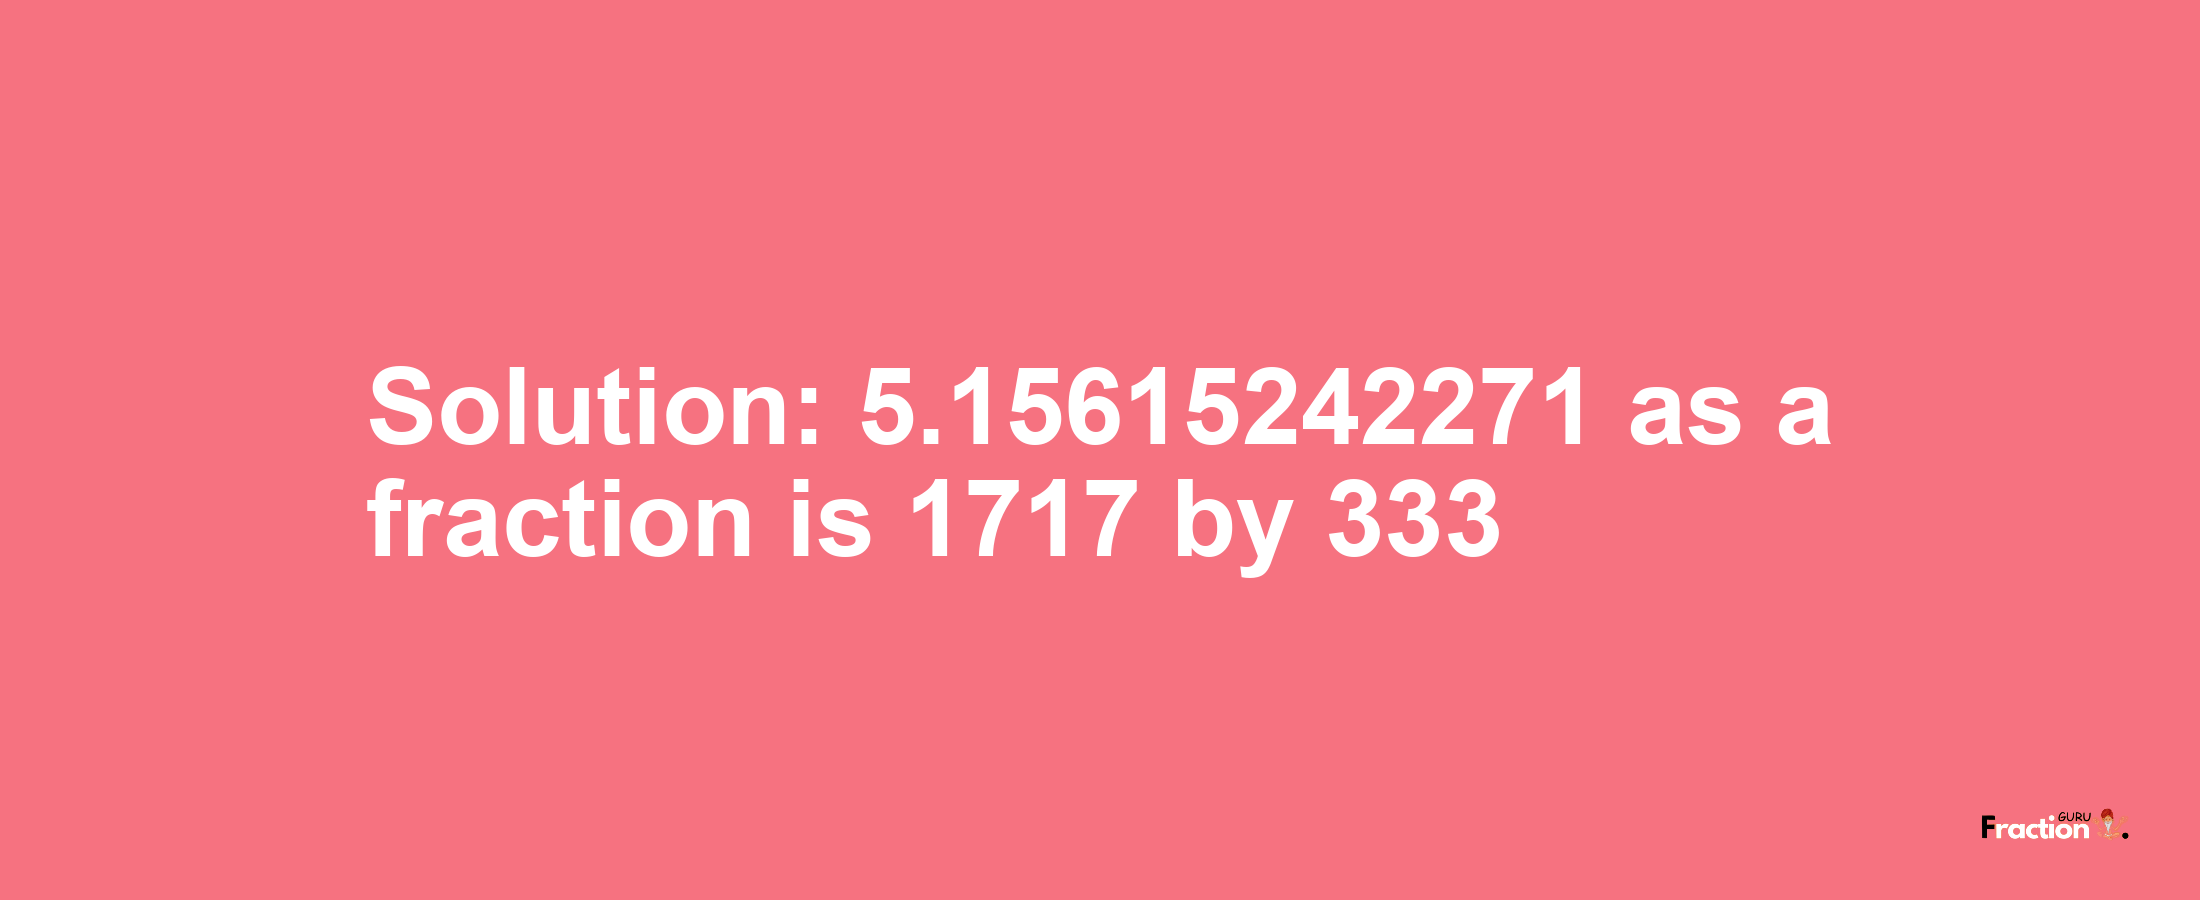 Solution:5.15615242271 as a fraction is 1717/333